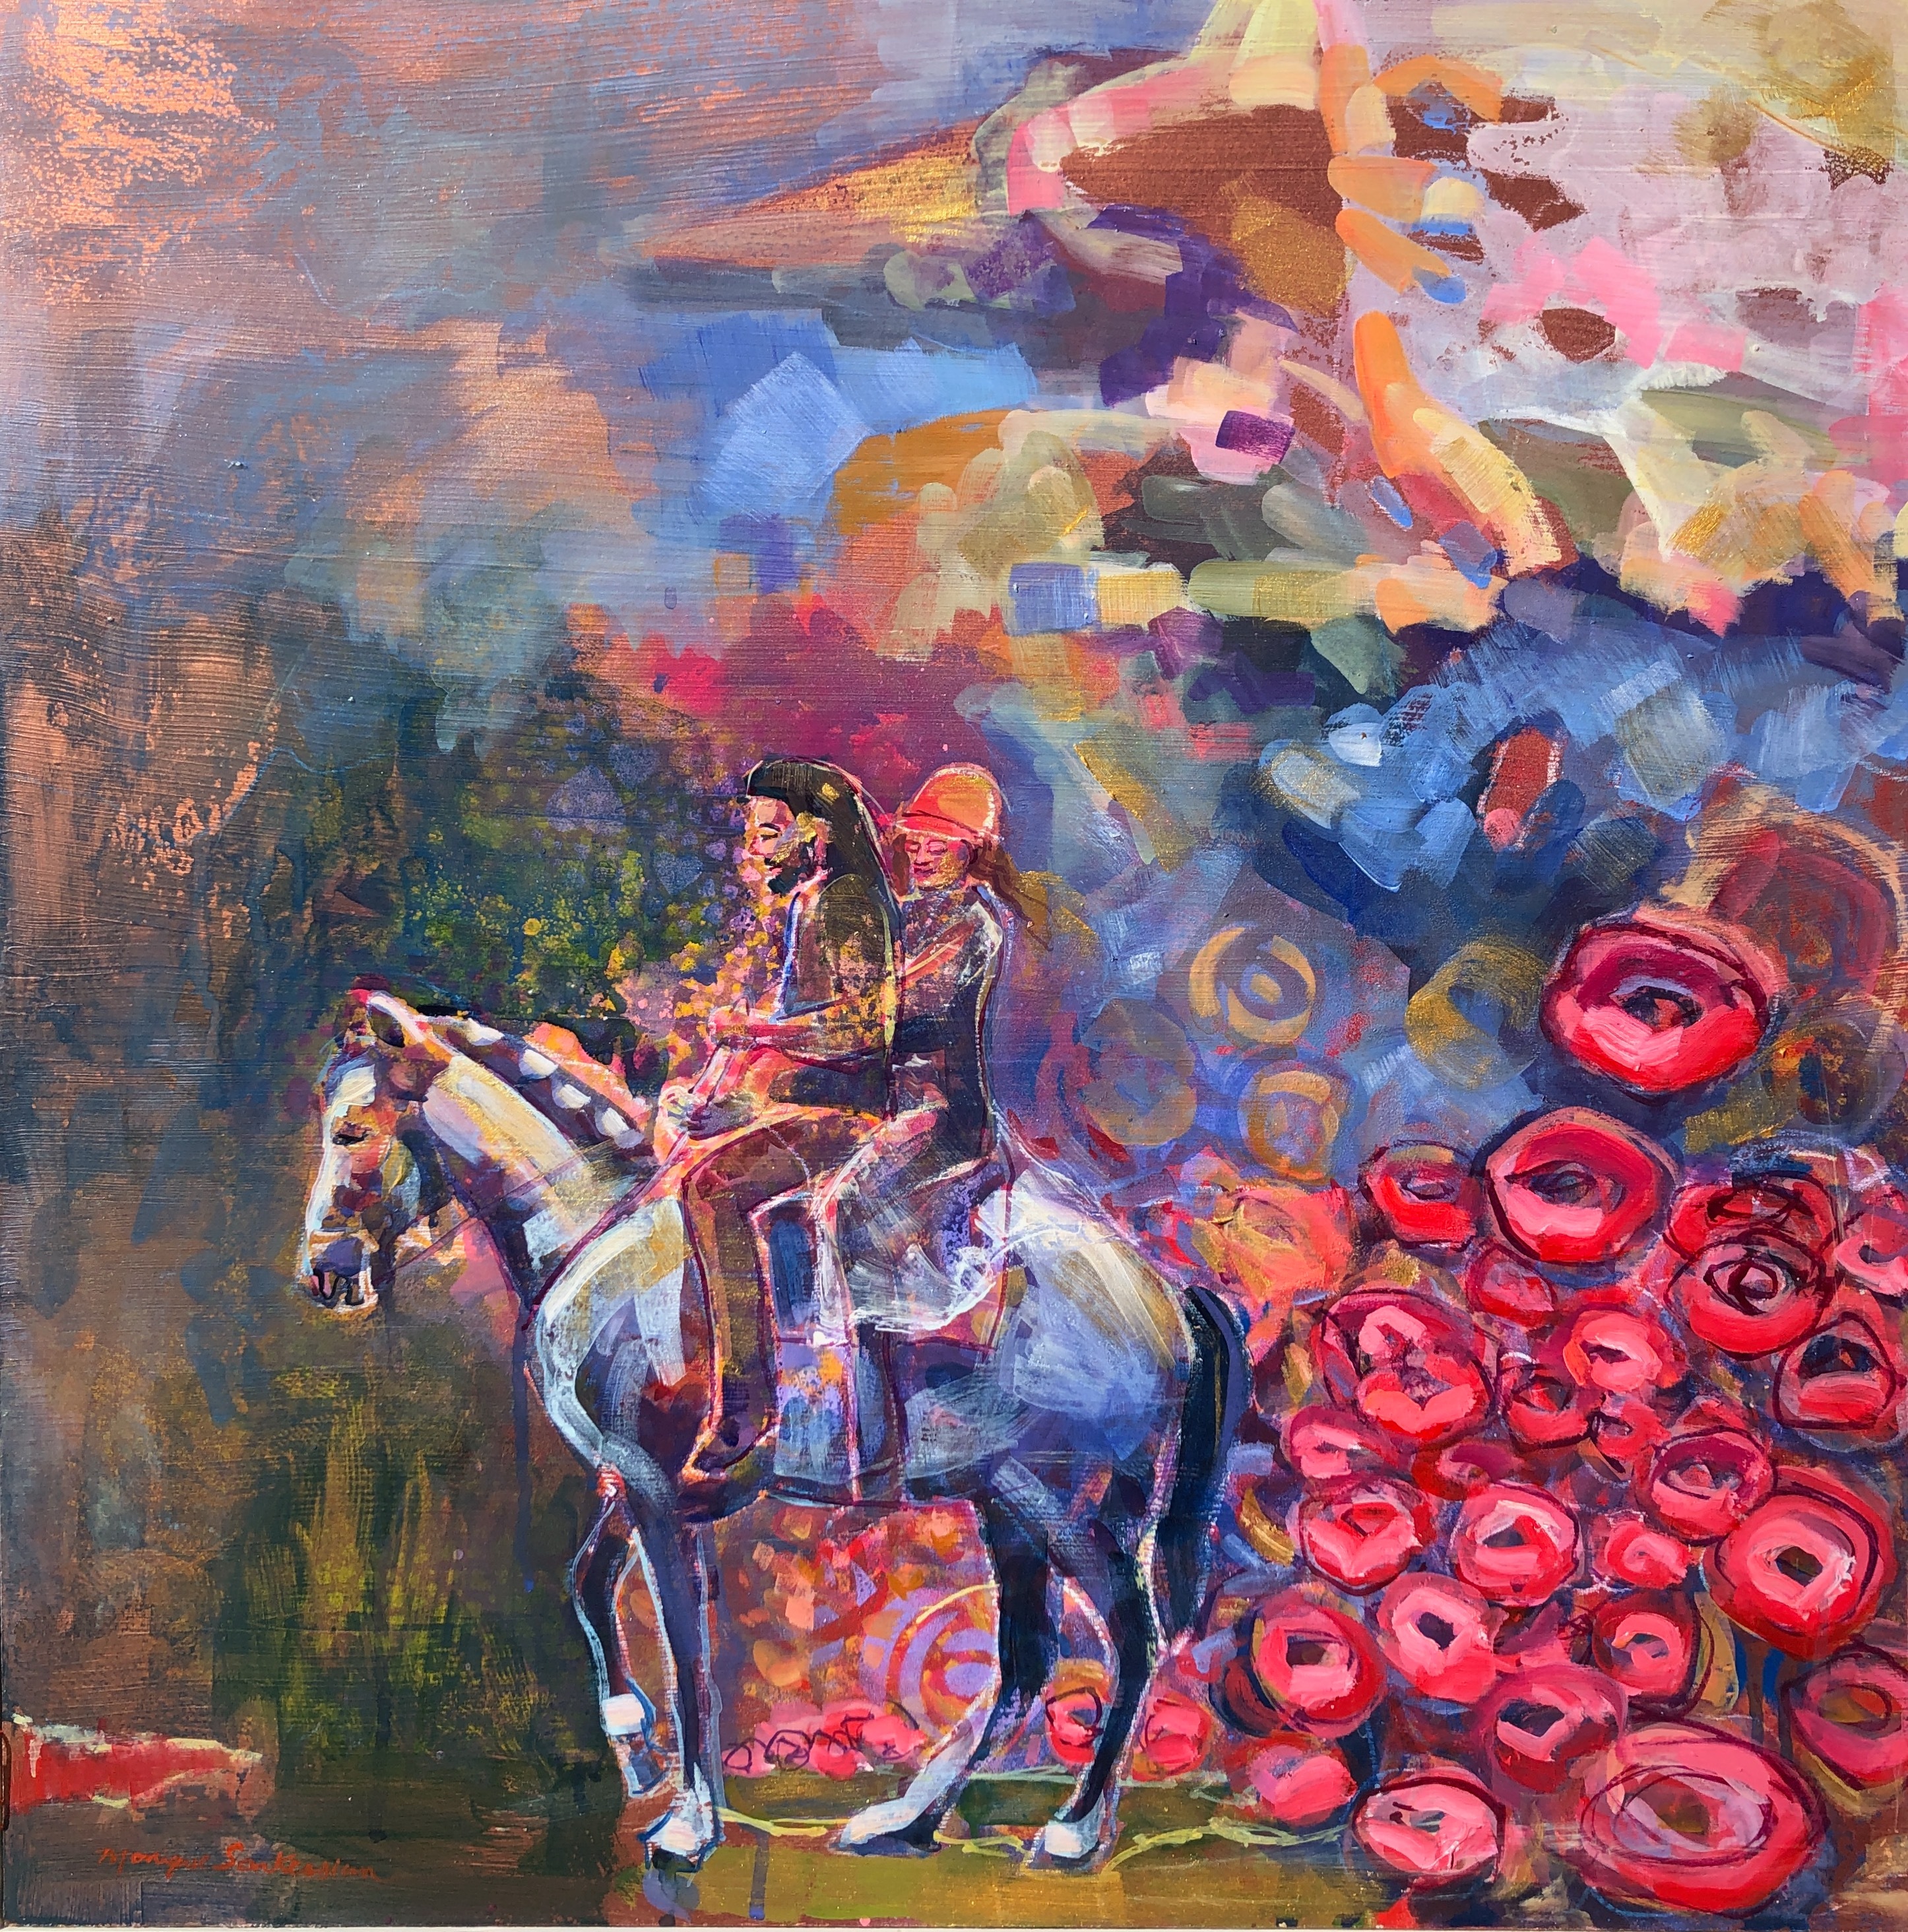 In the king s garden beloved riders 2 mixed media 24x24 rtq9z1